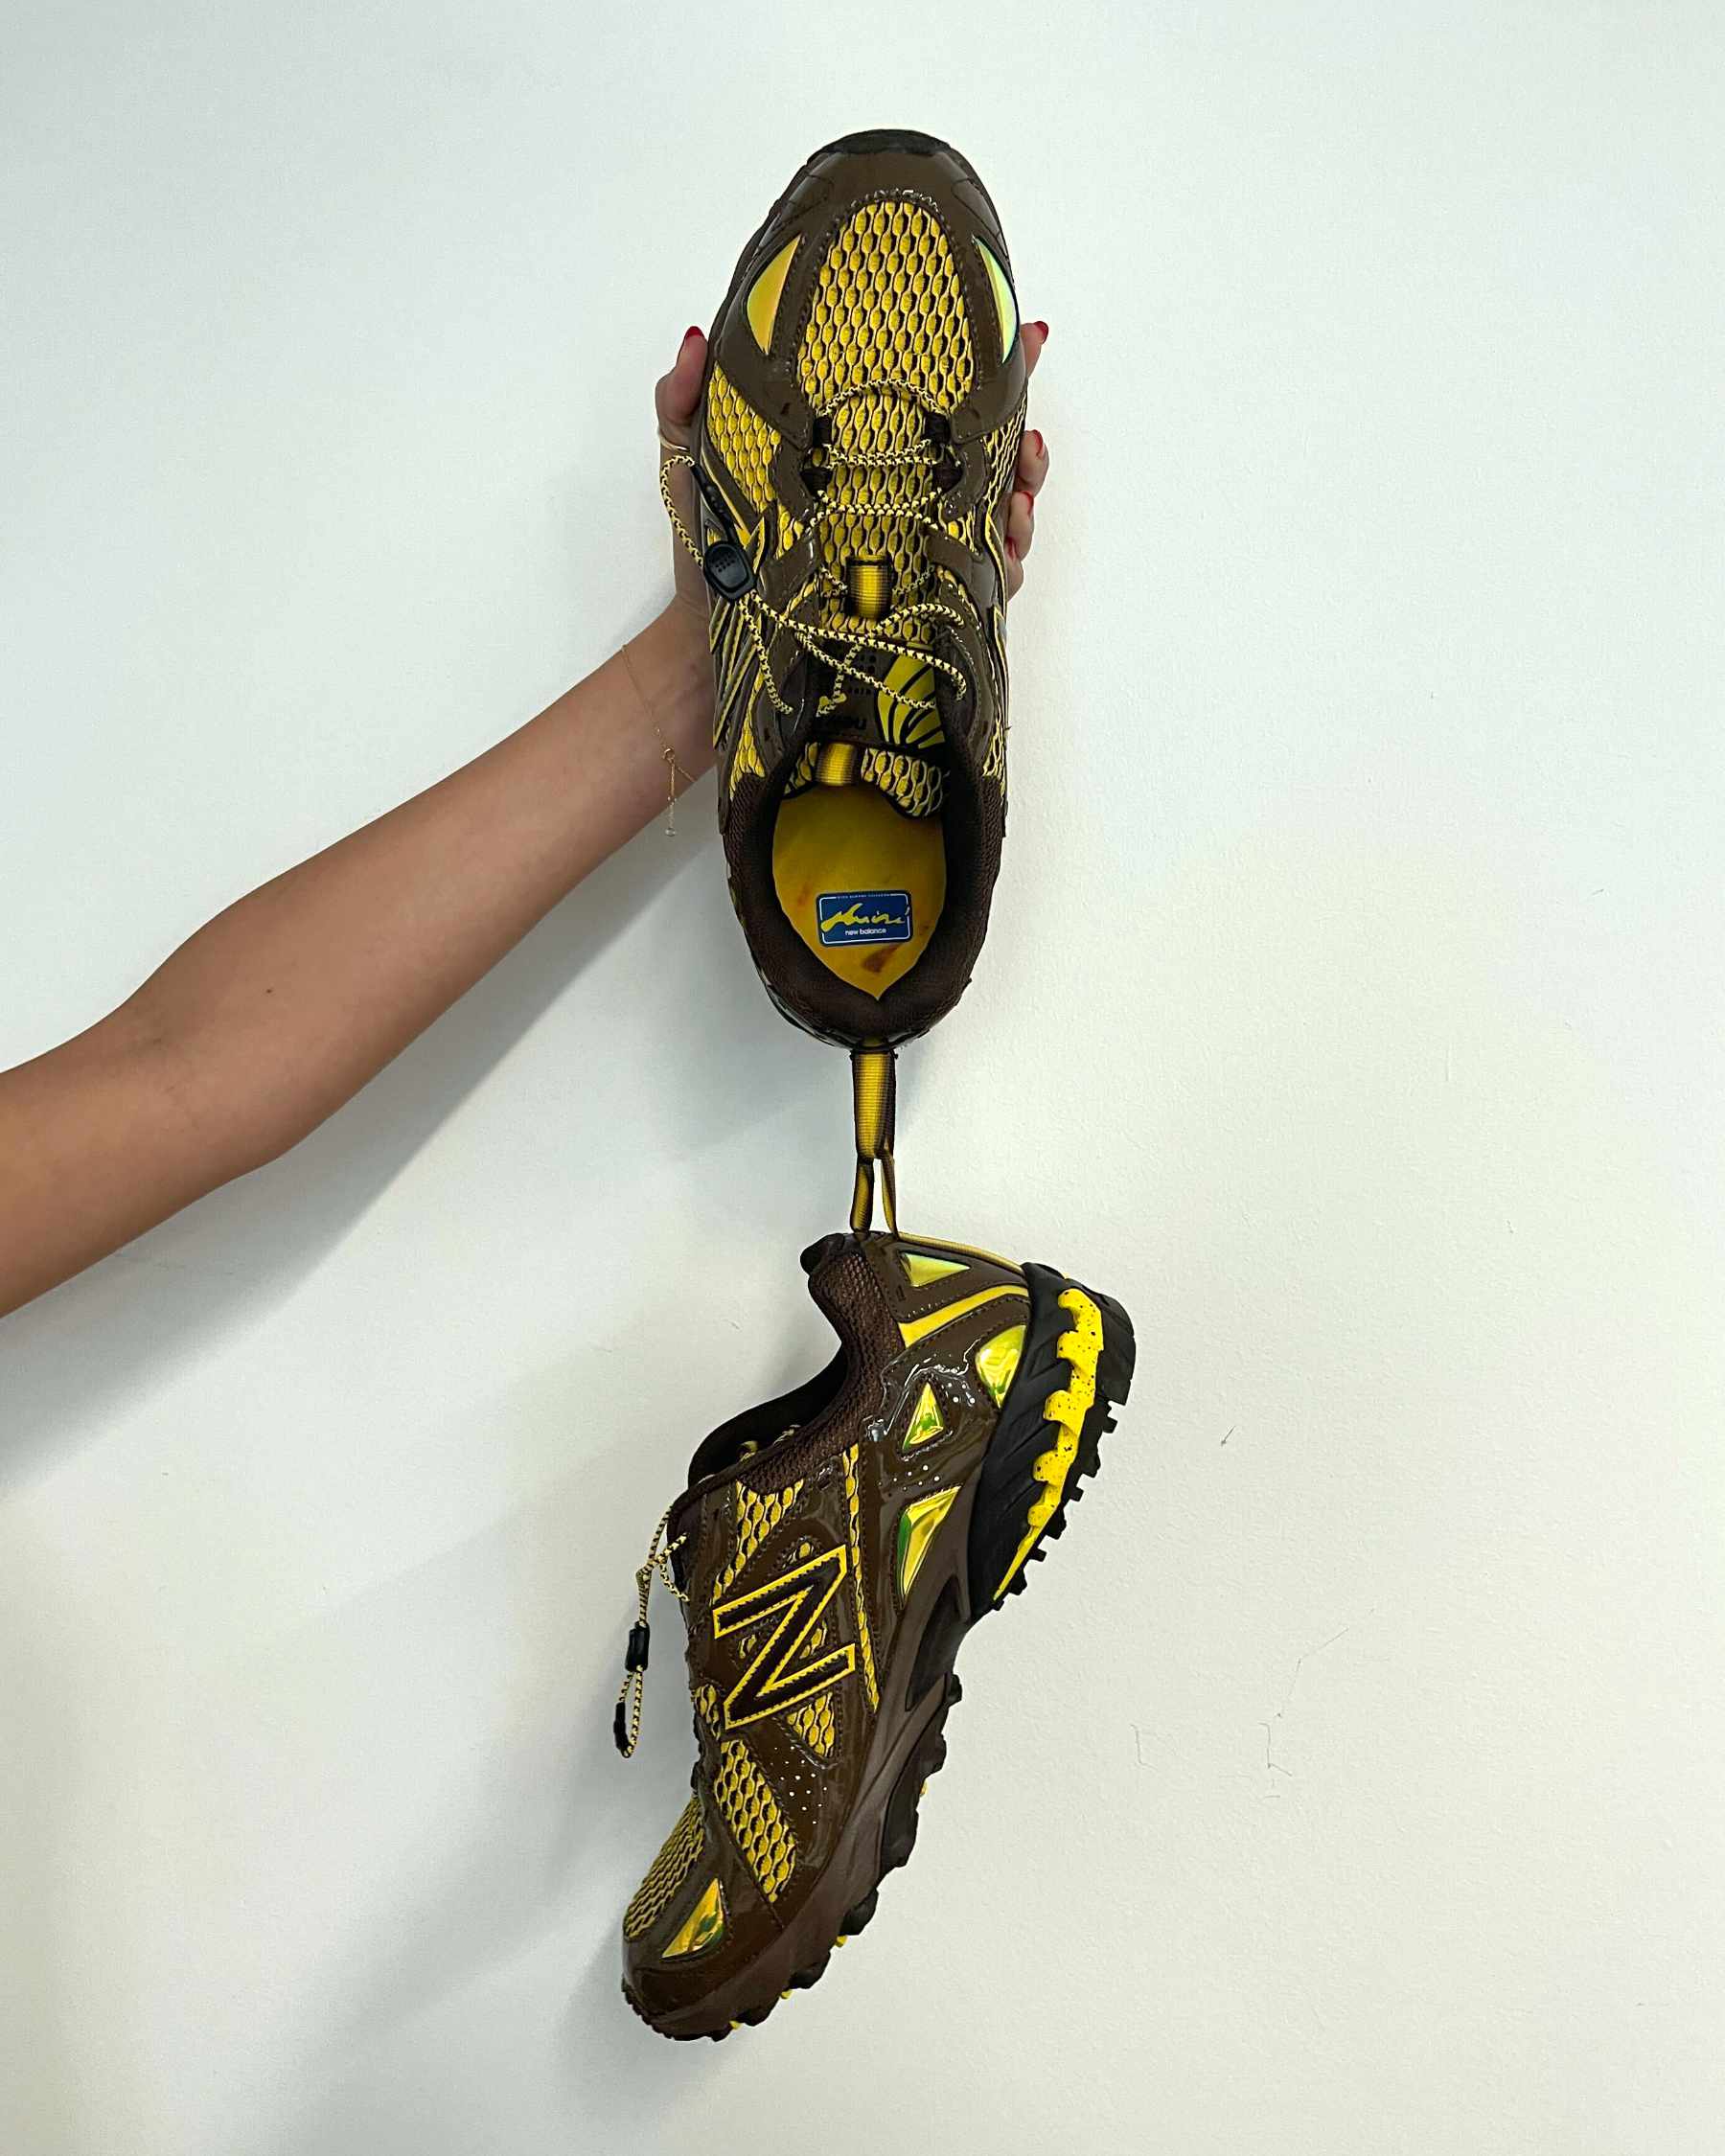 Amine's New Balance 610 shoe, "The Mooz," in brown and yellow colors being held from the rear pull tab